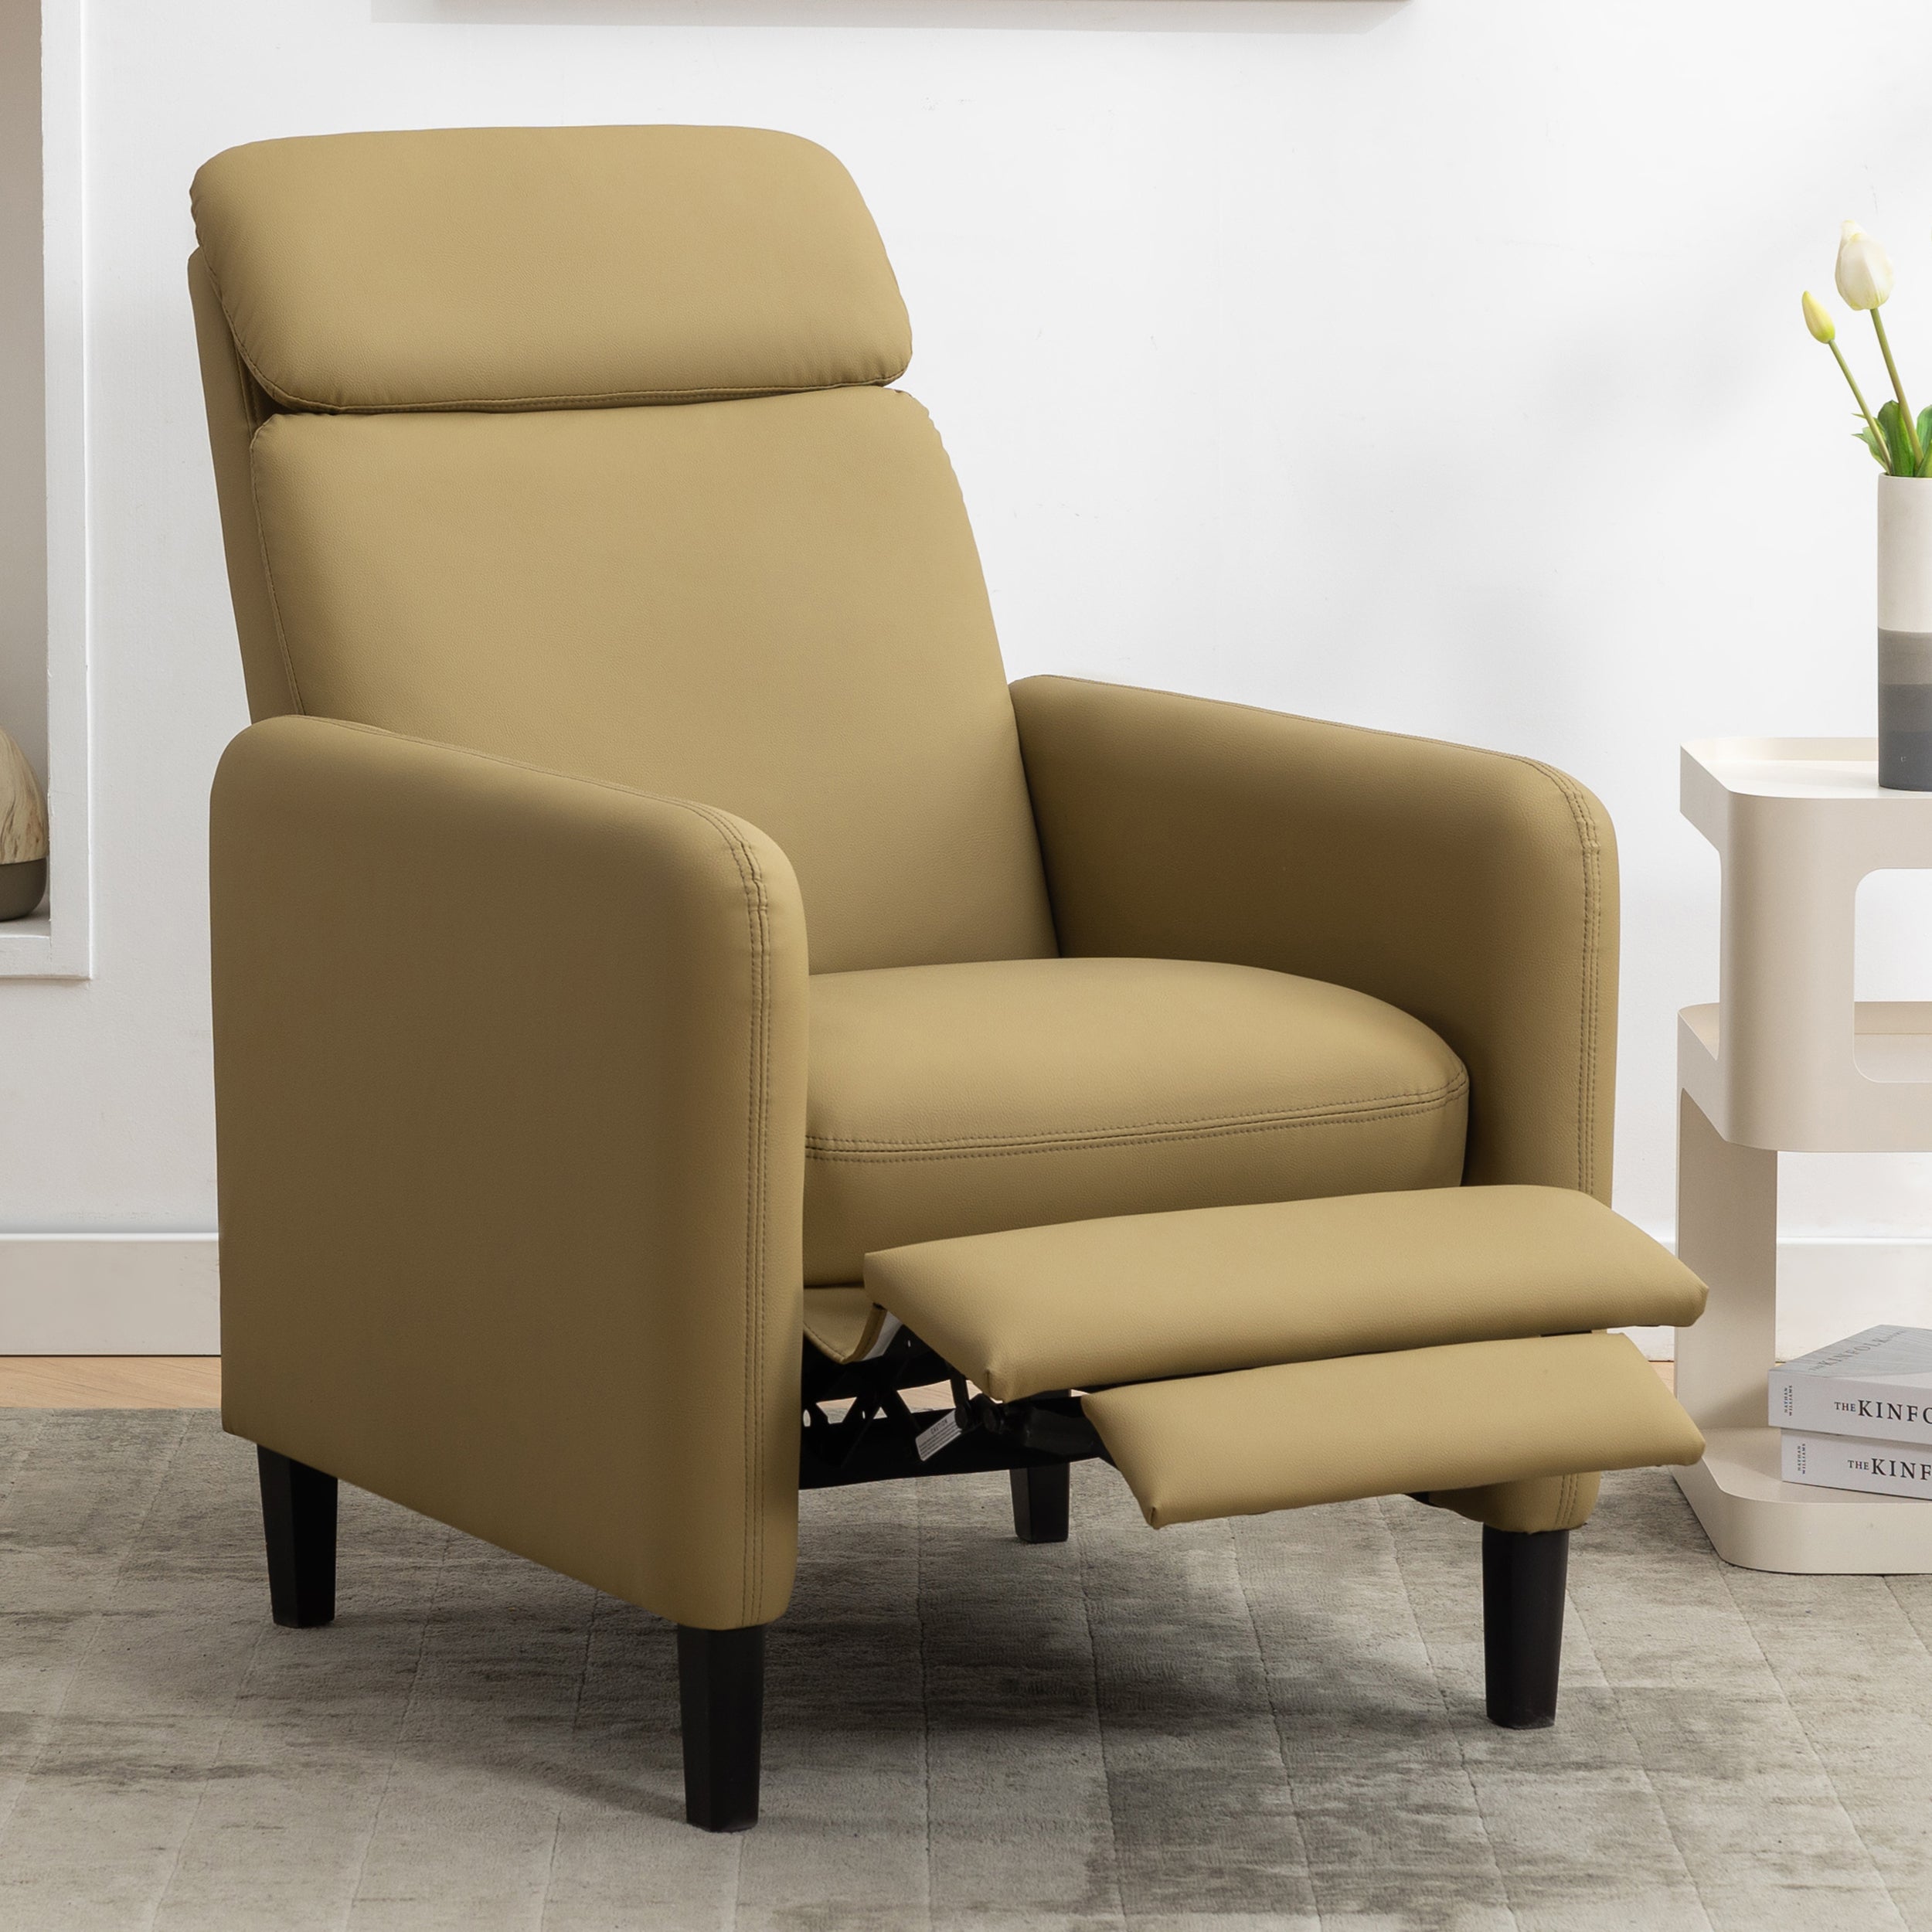 Modern-Artistic-Color-Design-Adjustable-Recliner-Chair-PU-Leather-for-Living-Room-Bedroom-Home-Theater,-Mustard-Green-